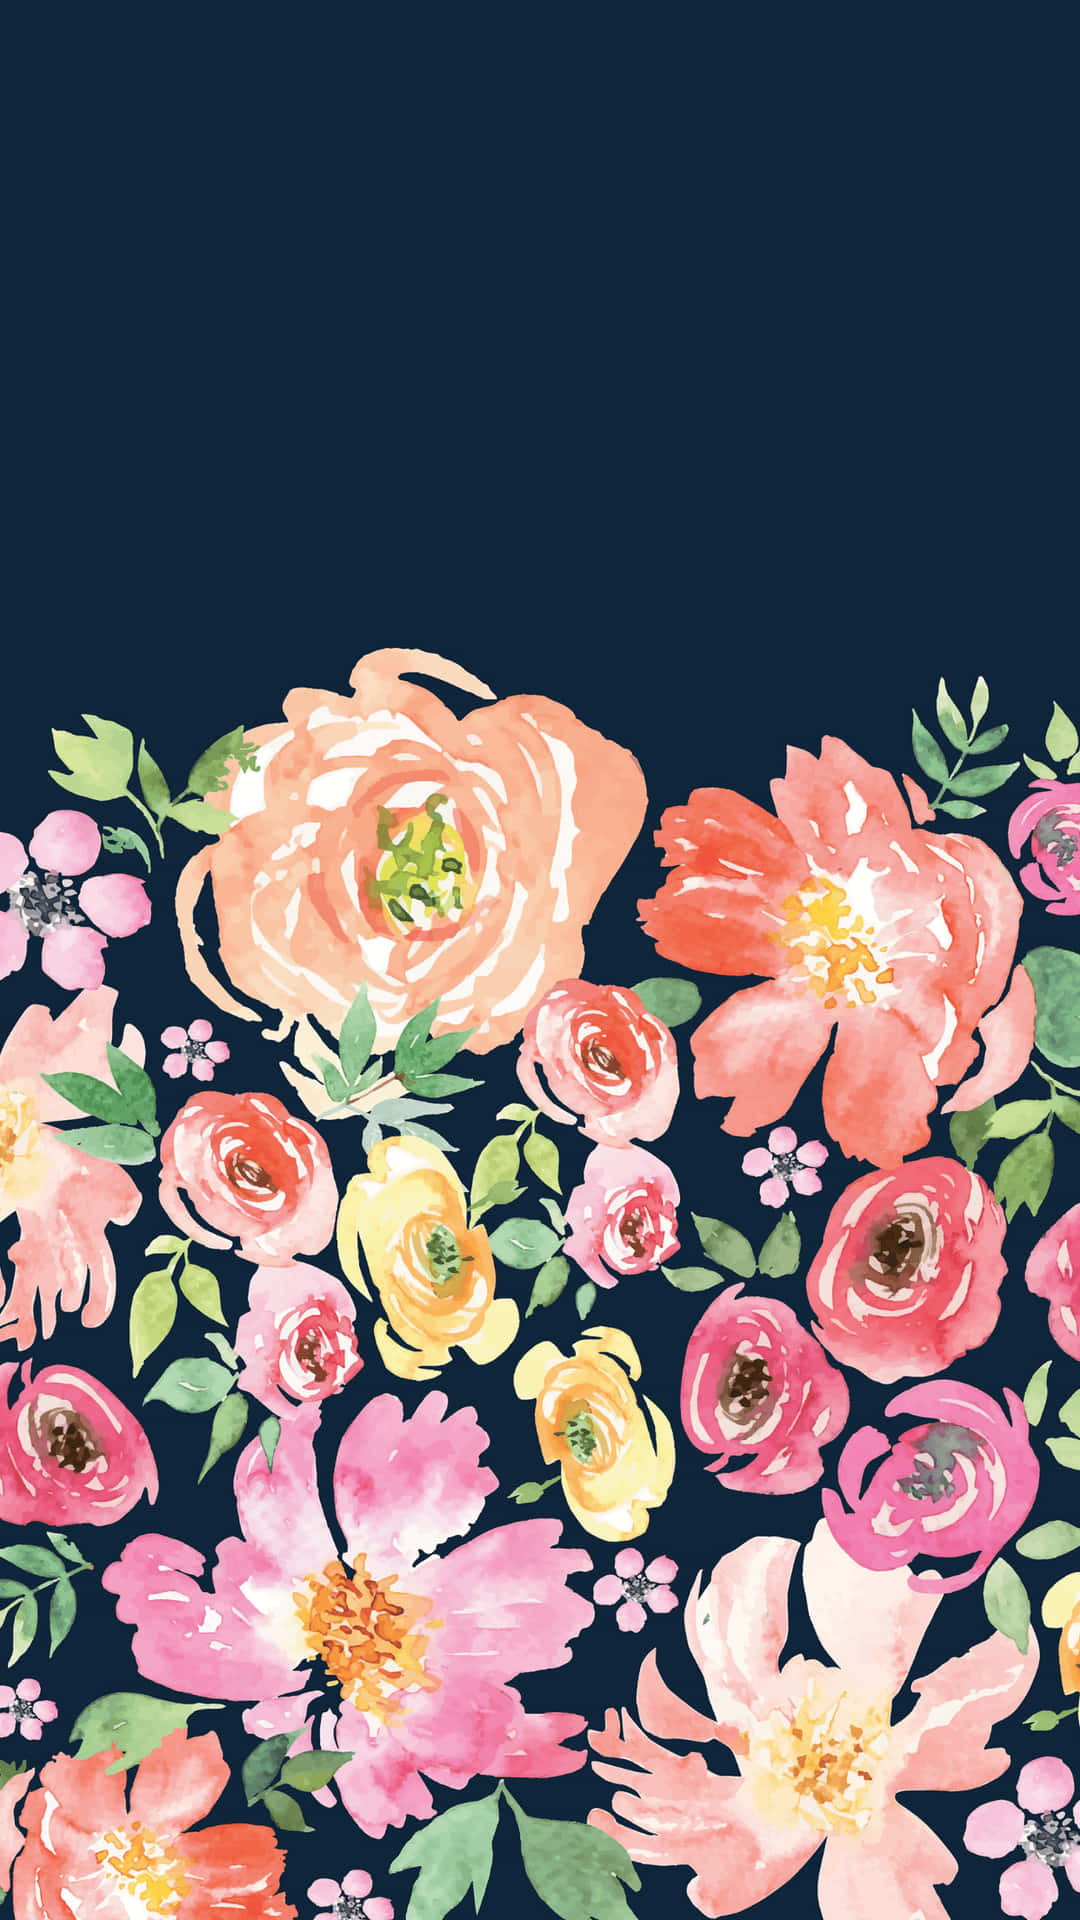 A Watercolor Floral Pattern On A Dark Background Wallpaper